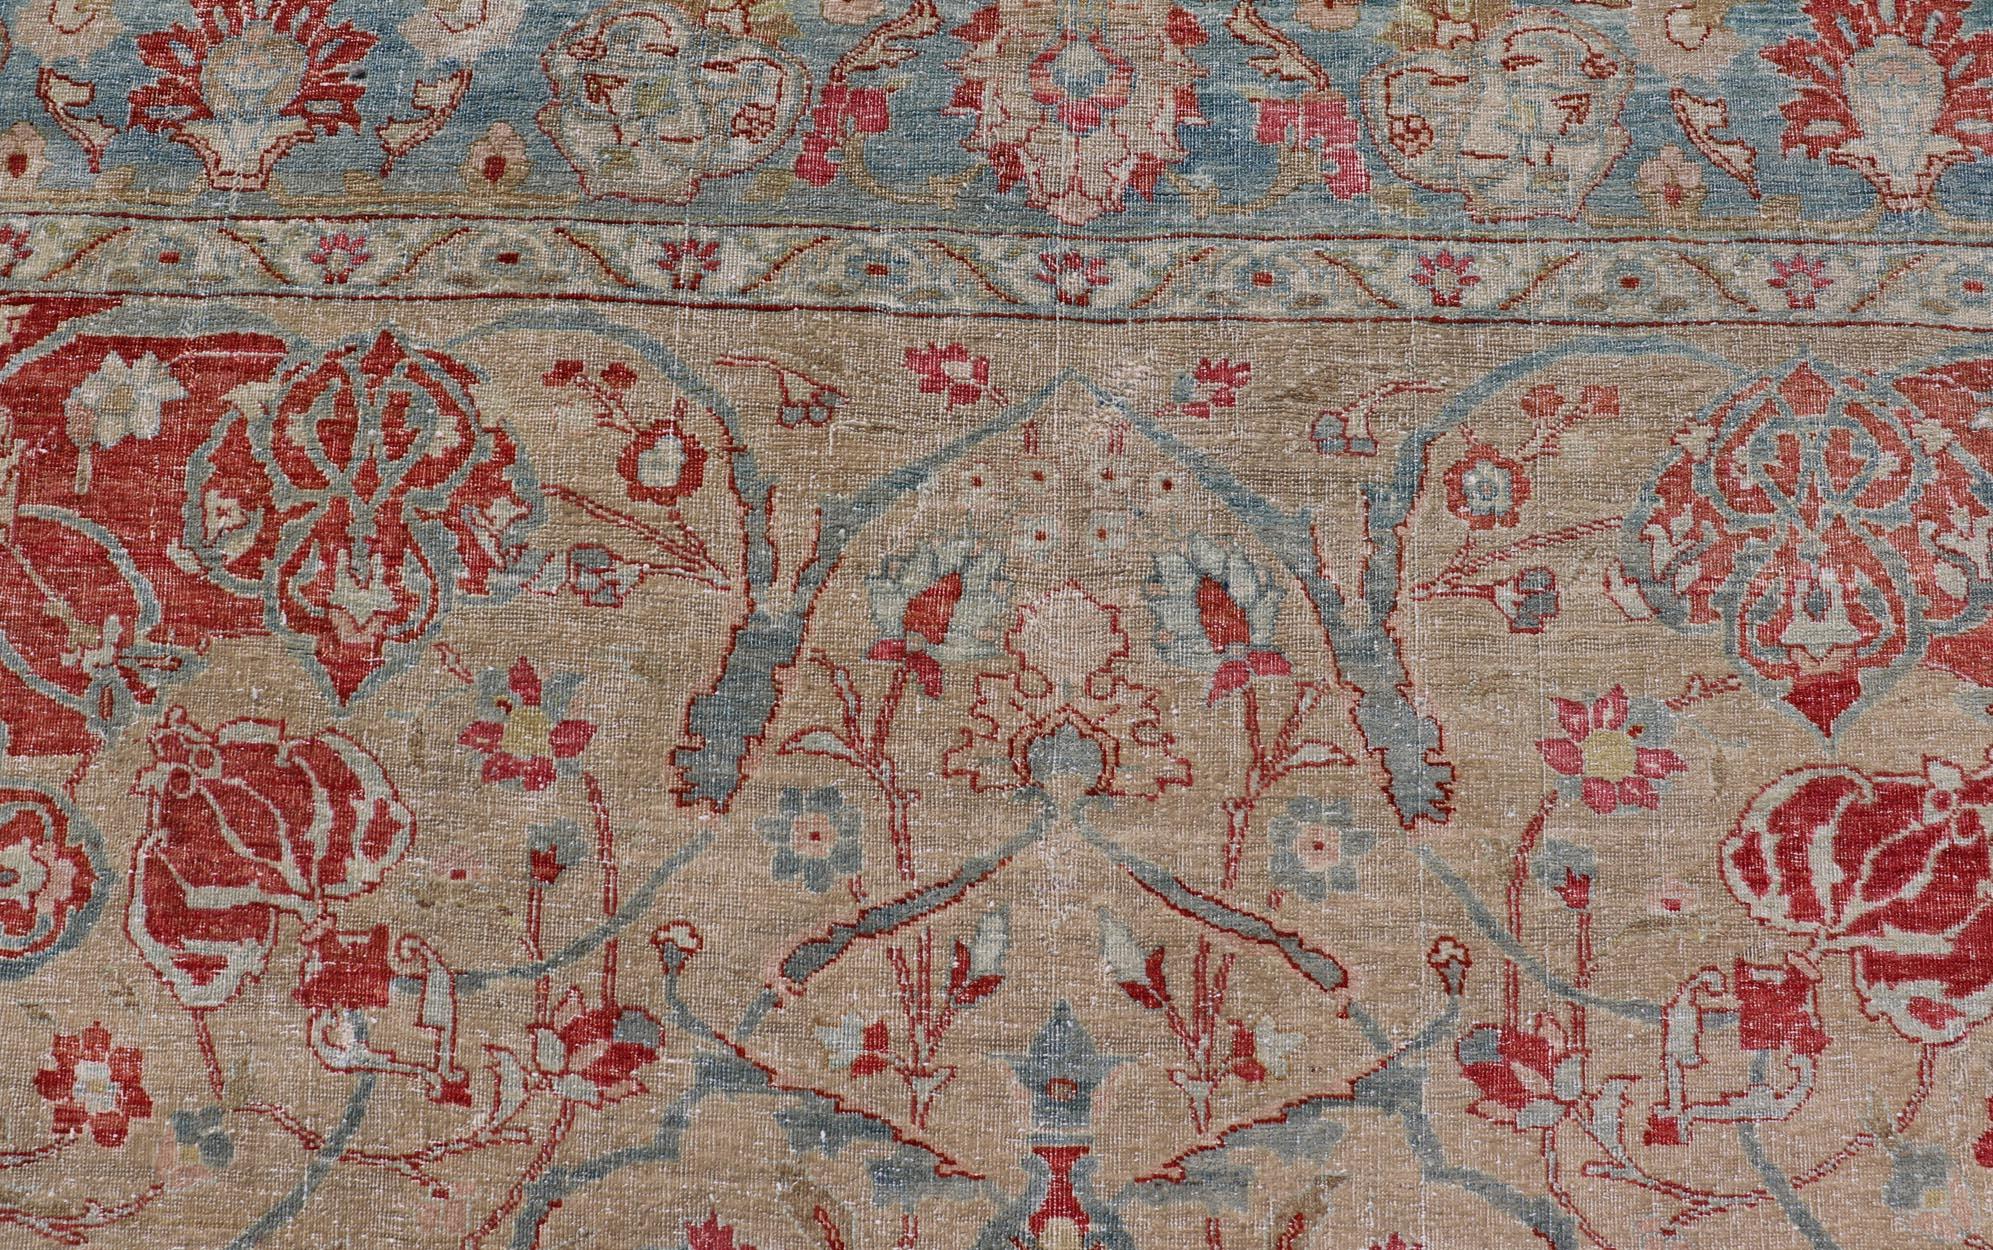 Antique Persian Tabriz Rug with Floral Medallion Design in Tan, Red, and Blue For Sale 7